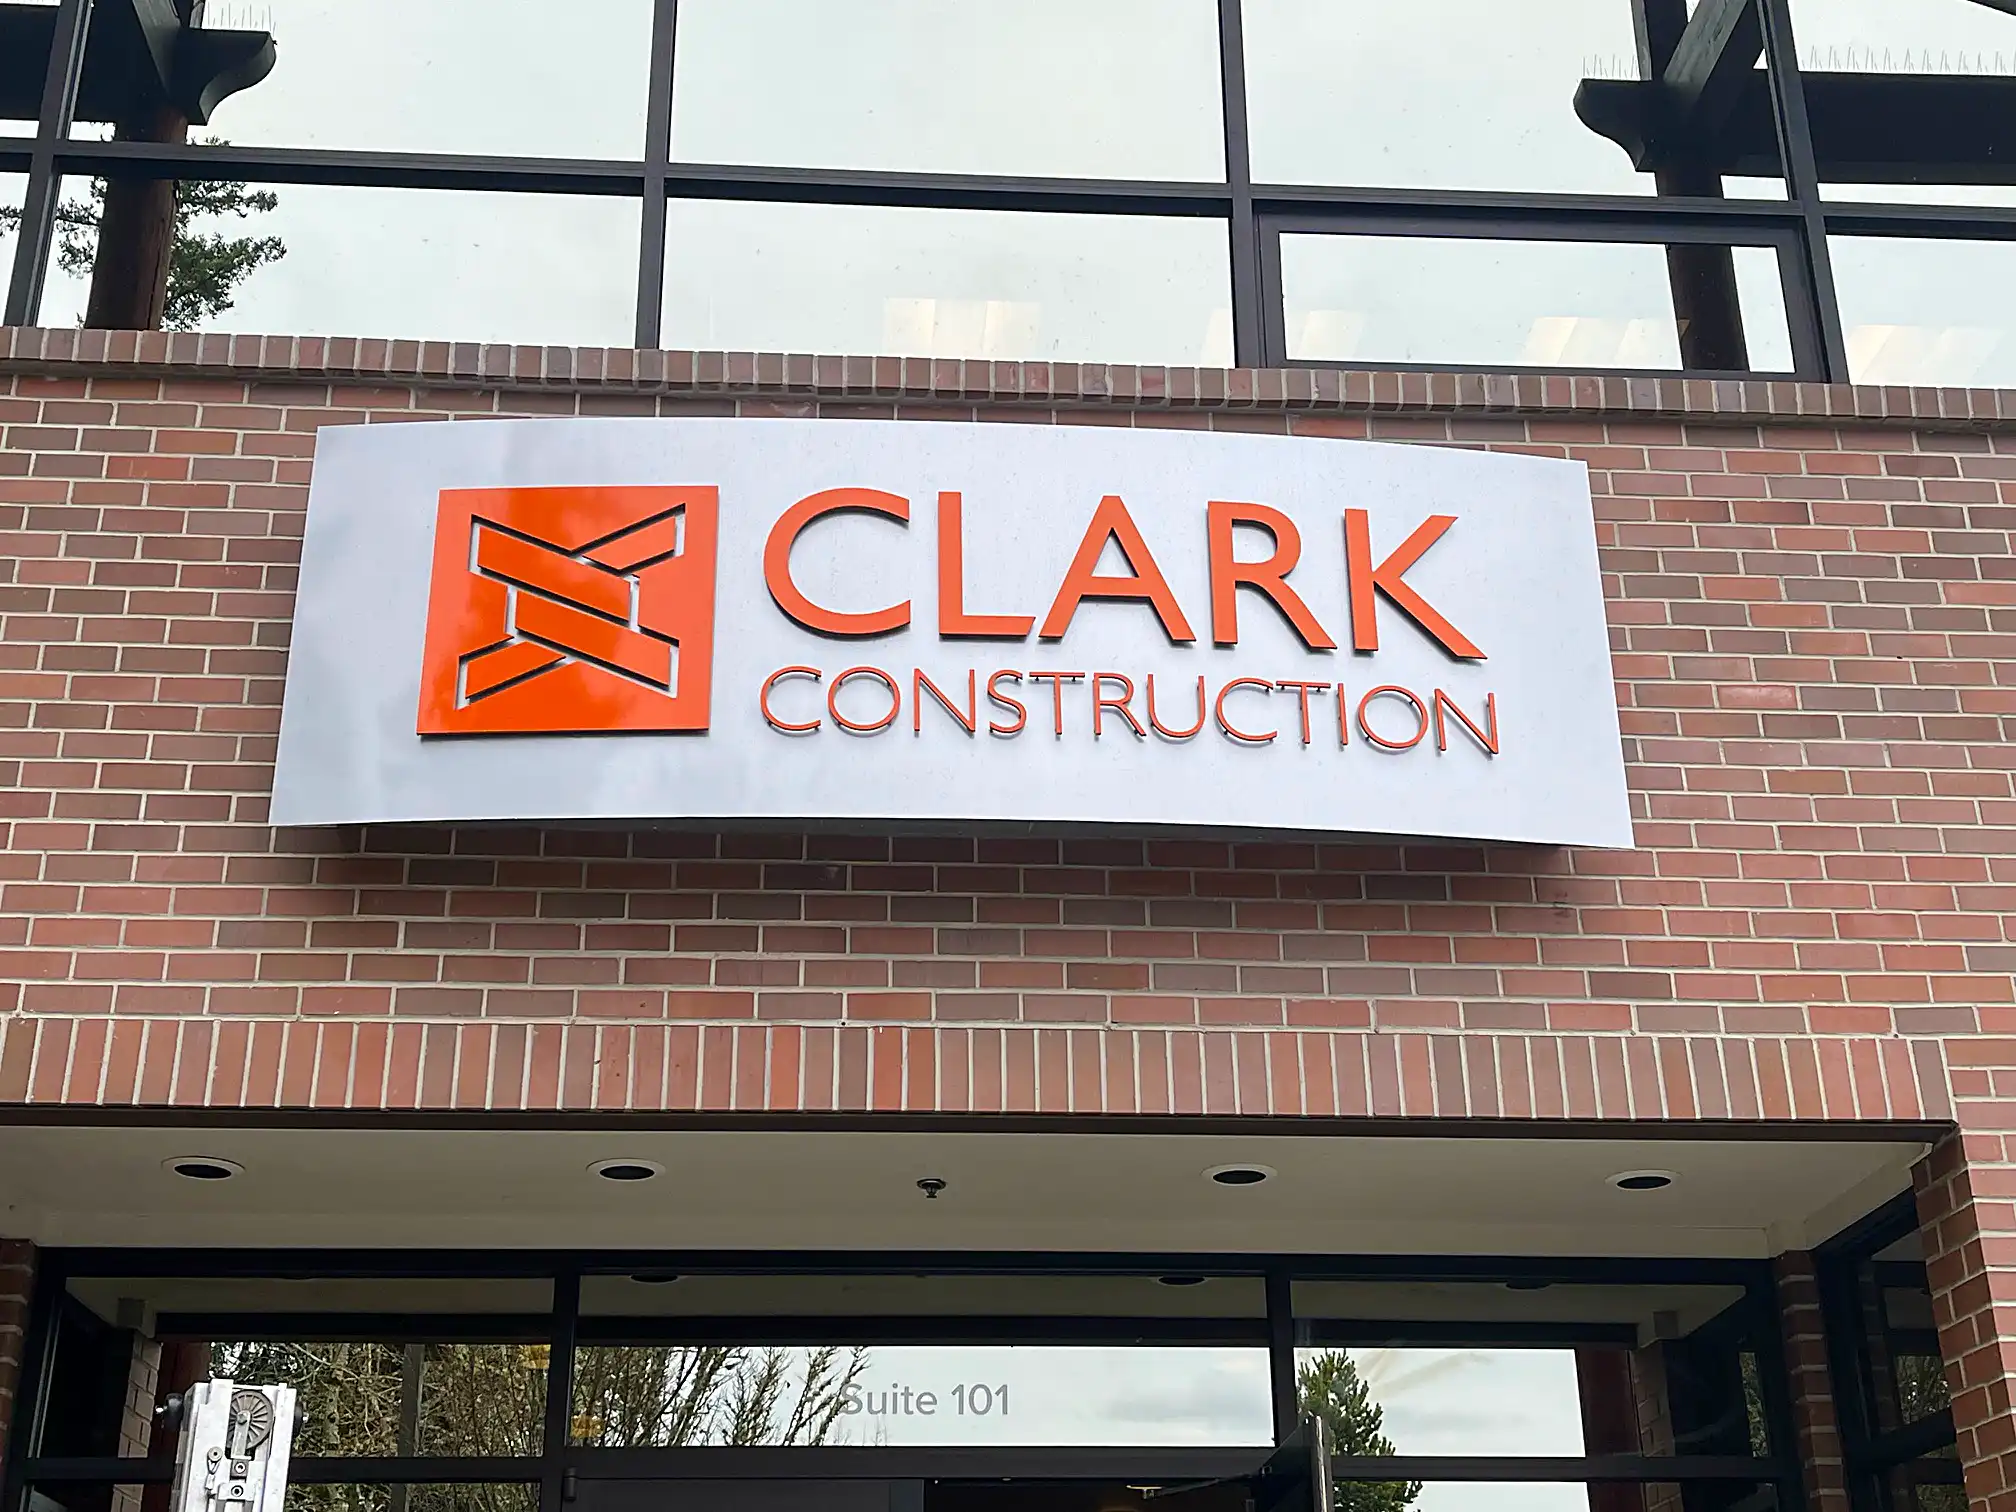 Clark Construction sign, fabricated by Monkey Wrench Fabrication, LLC